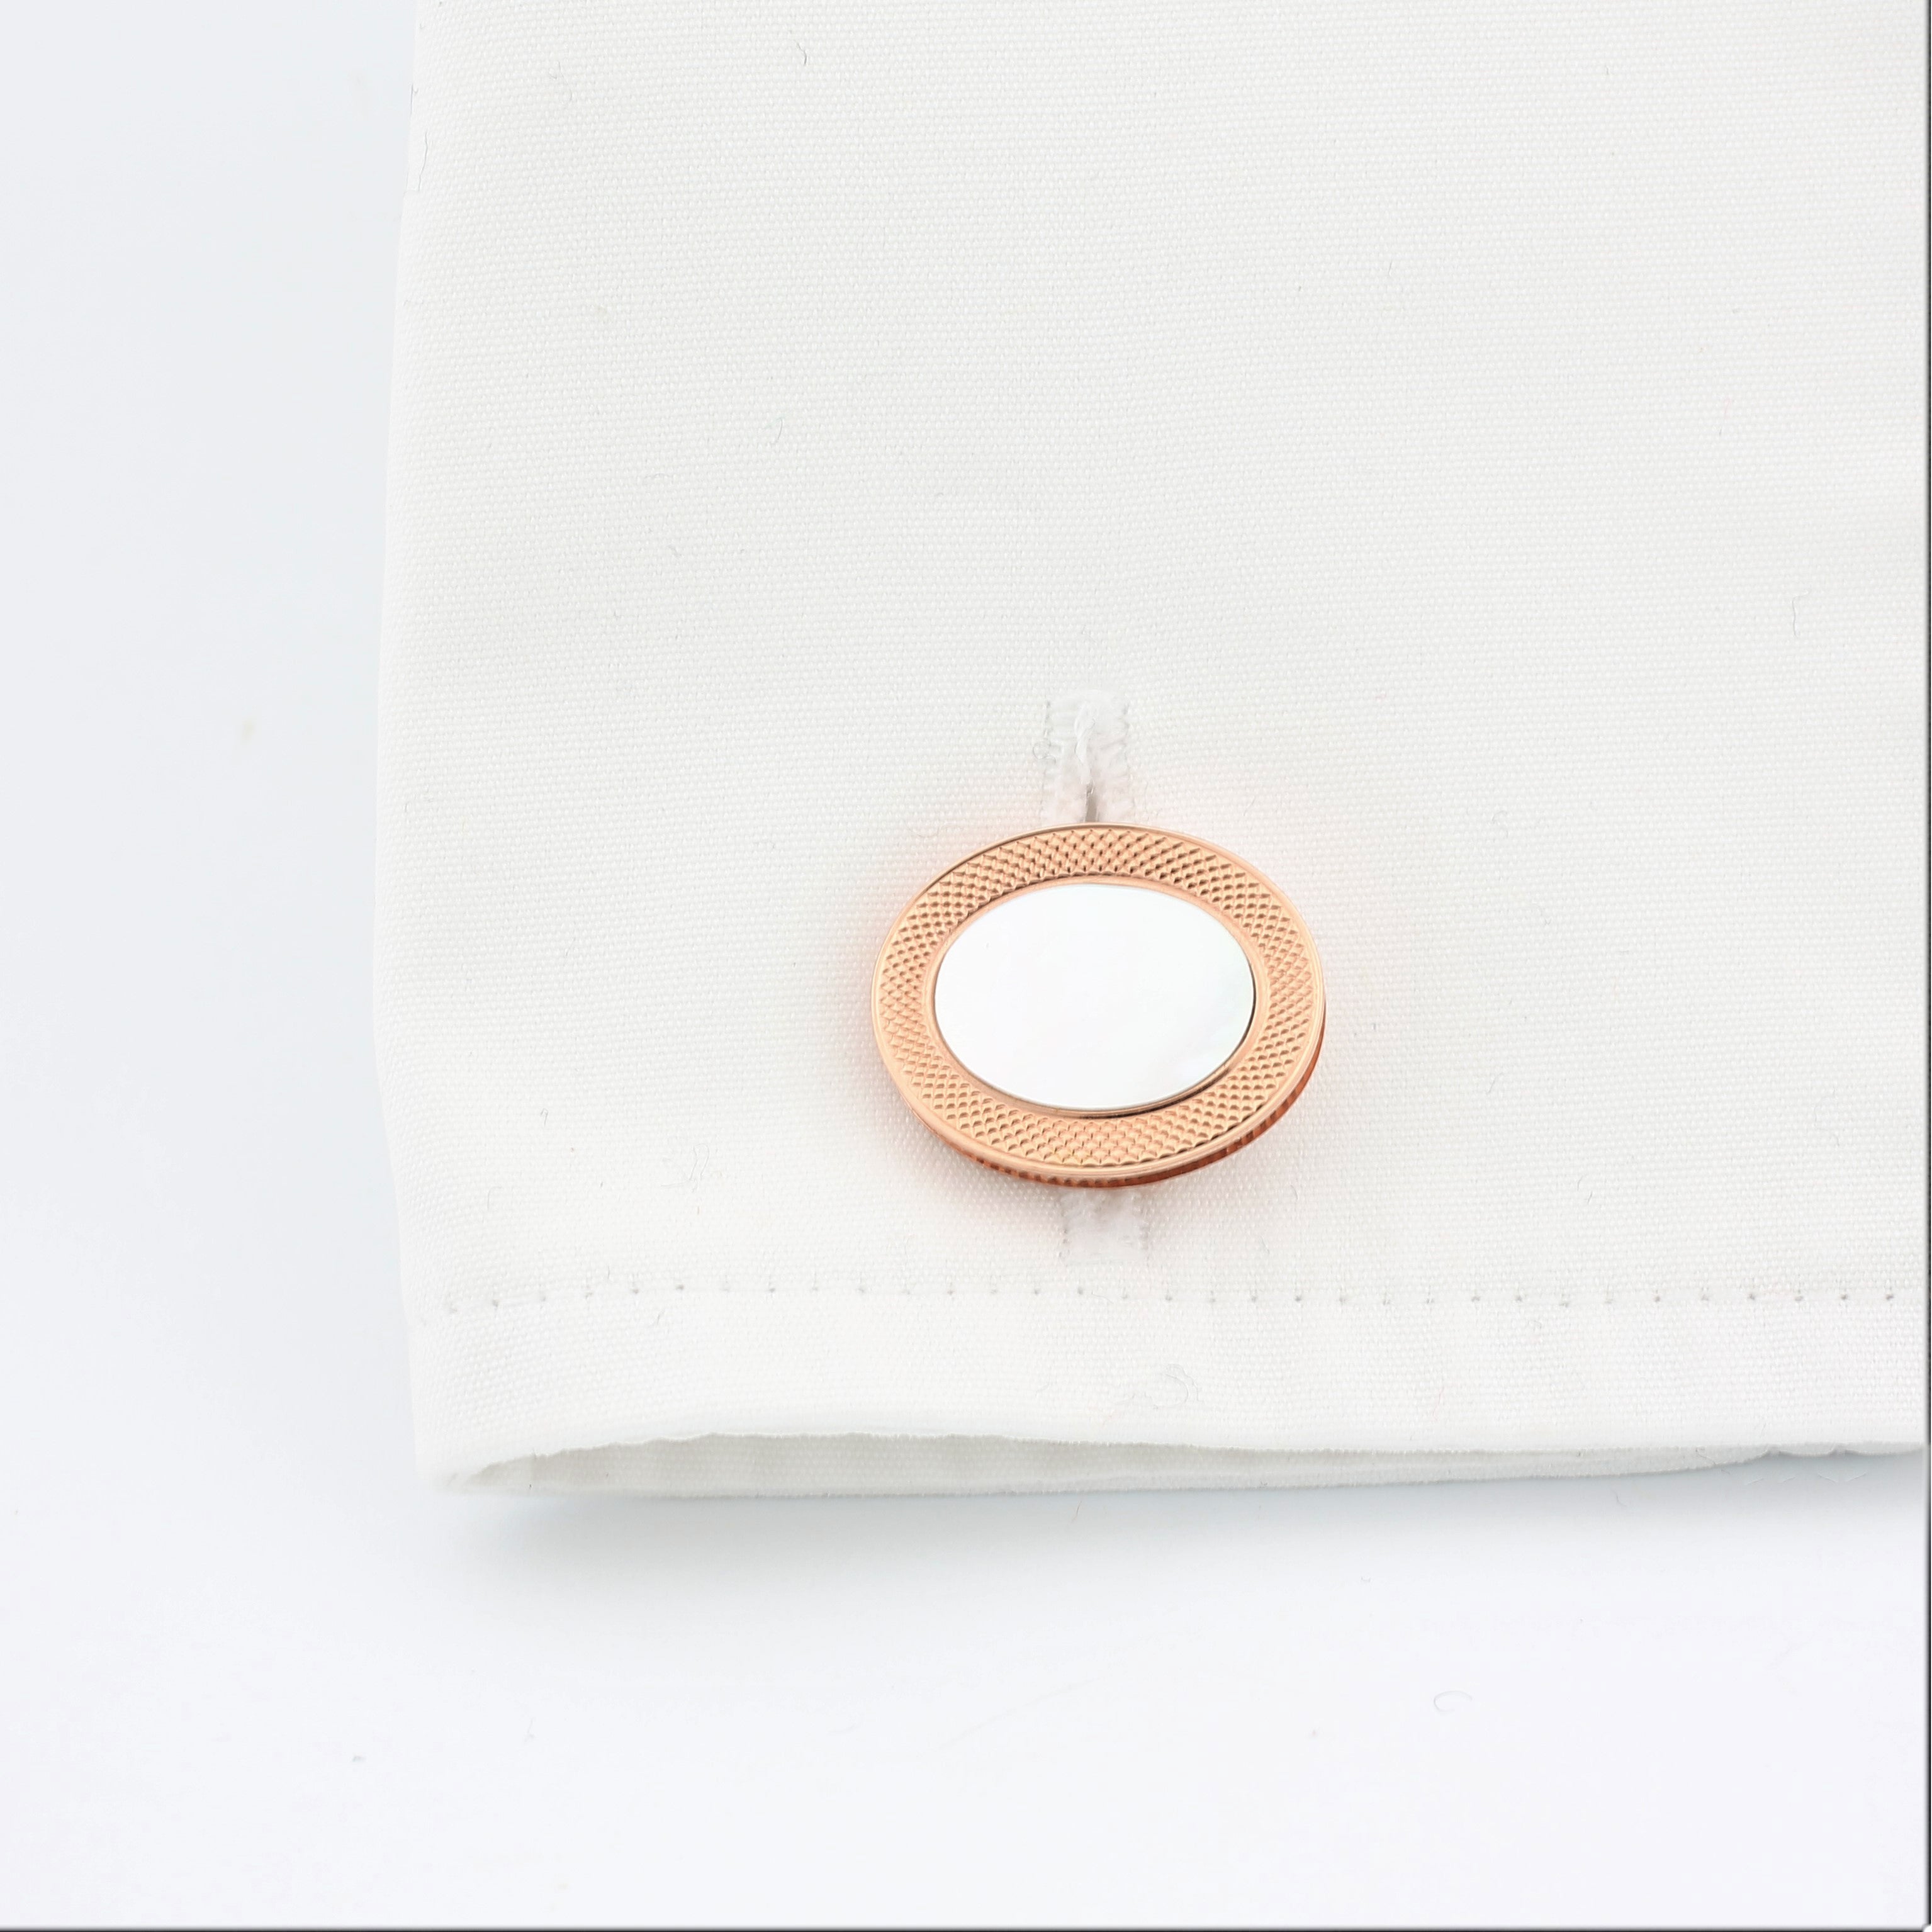 MOTHER OF PEARL - REEDED EDGE - OVAL 18ct ROSE GOLD CUFFLINKS - cuff